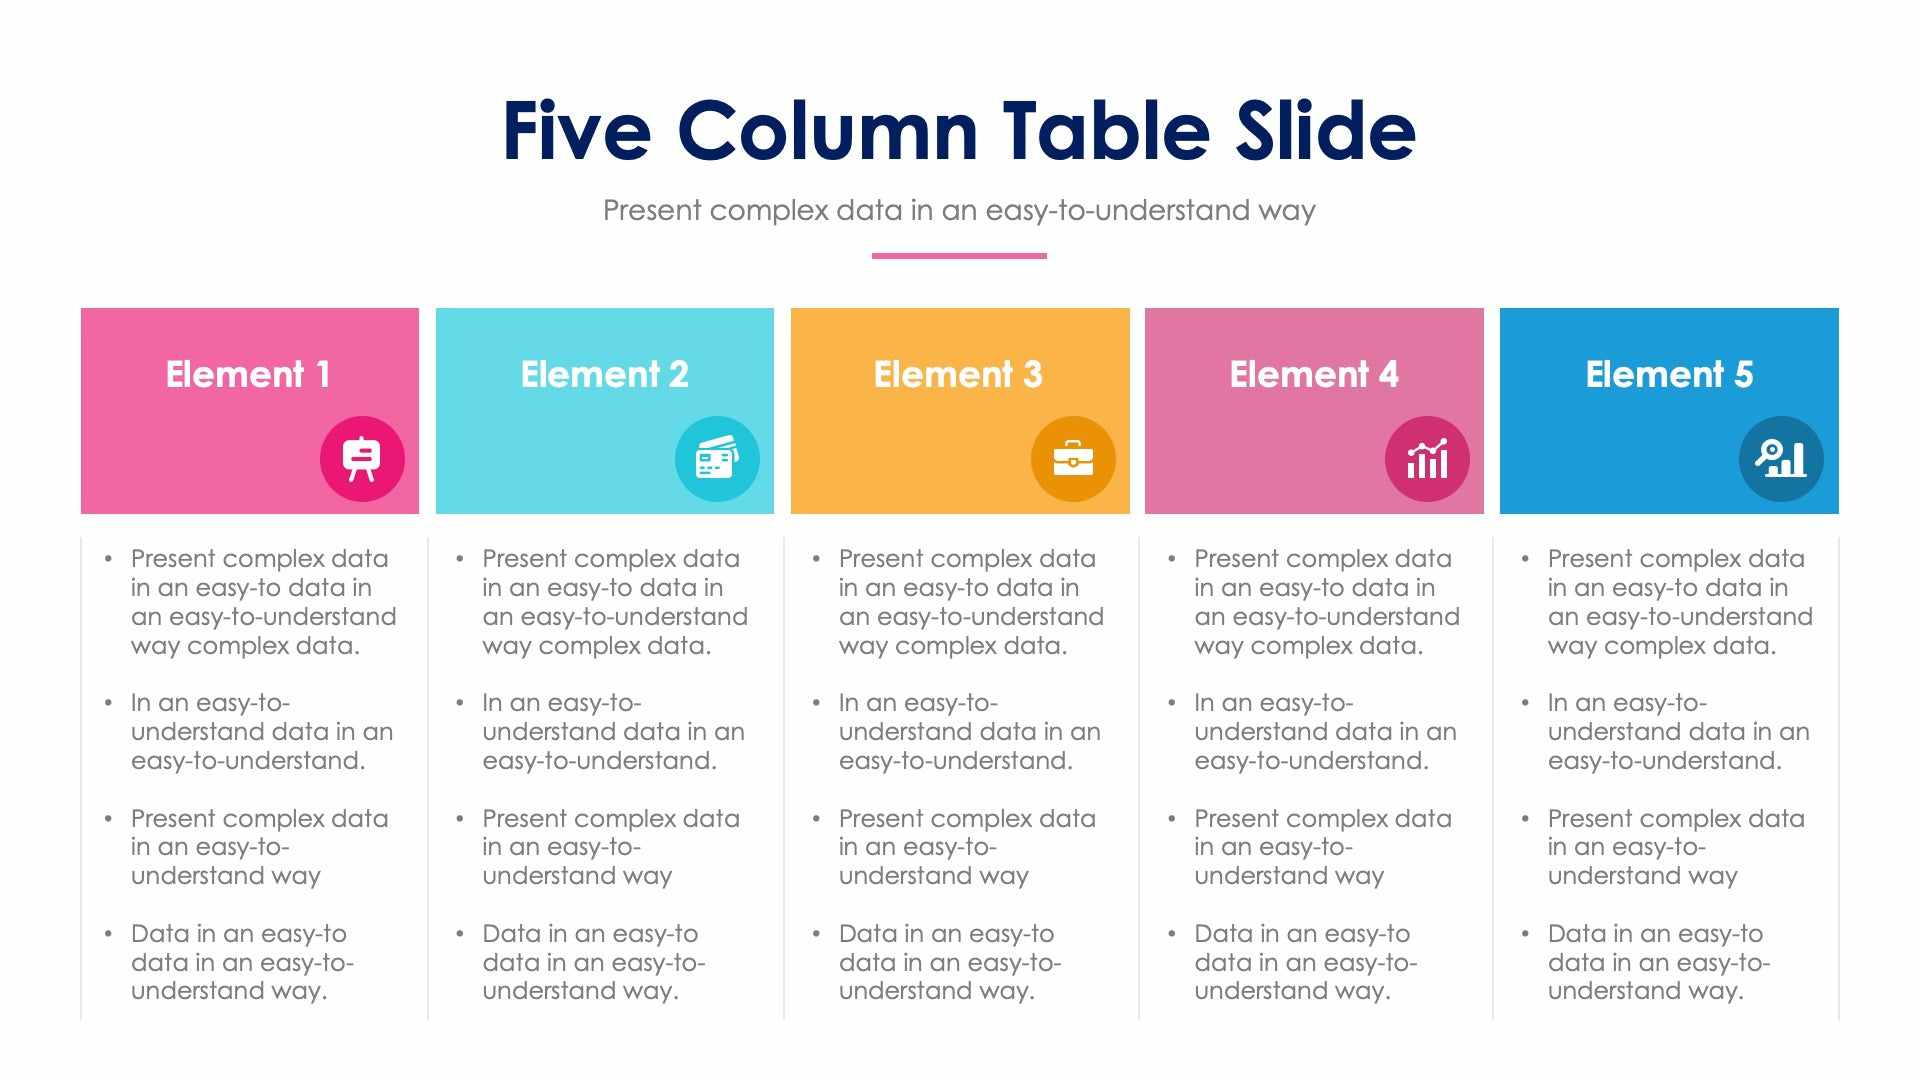 infographic table